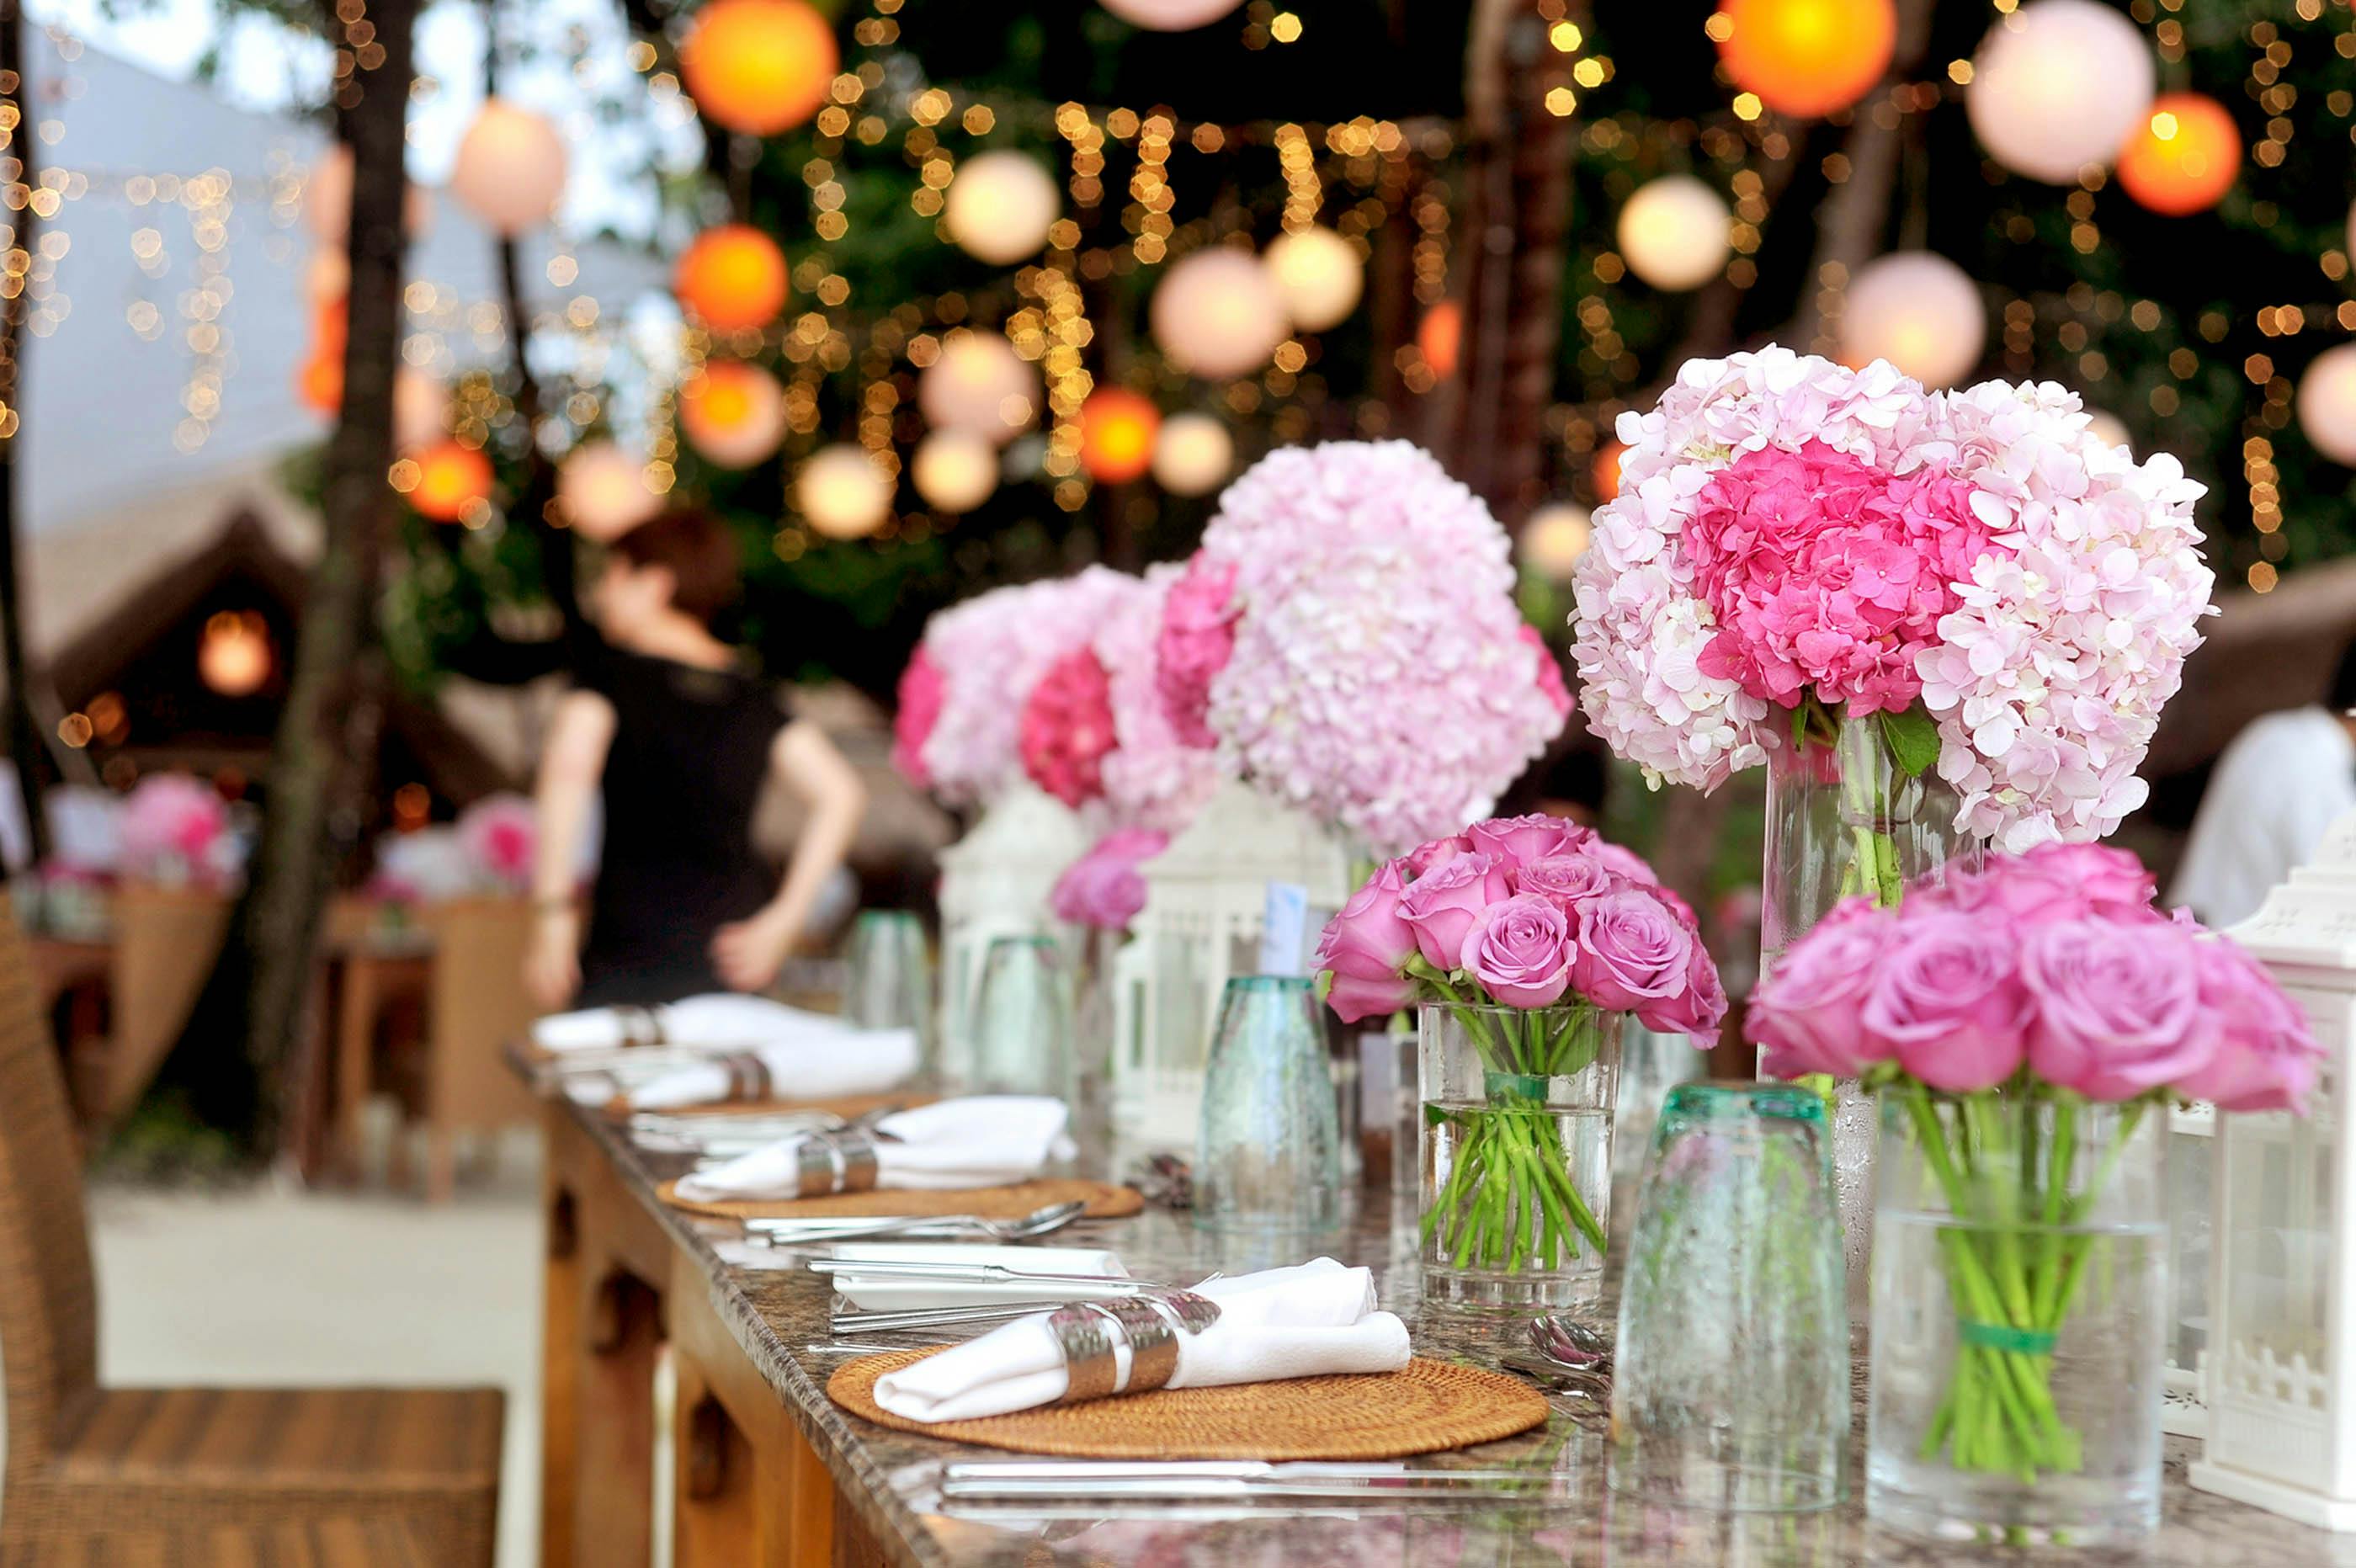 A venue decorated with flowers and table settings | Source: Pexels